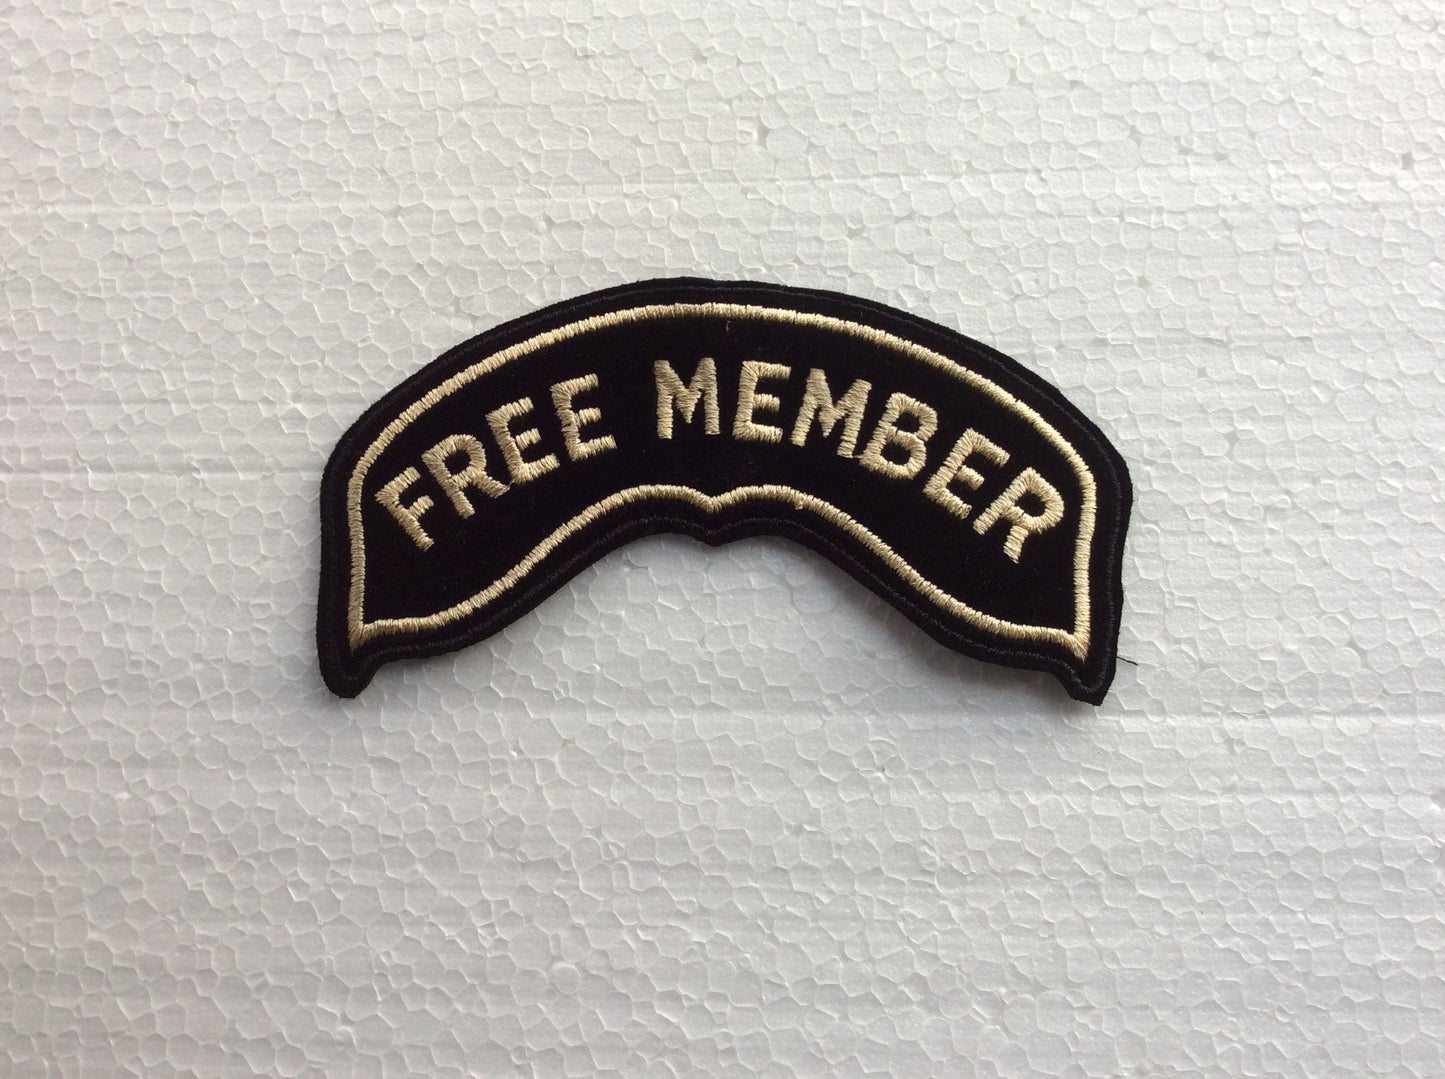 Grand Ecusson patch roker – FREE MEMBER –